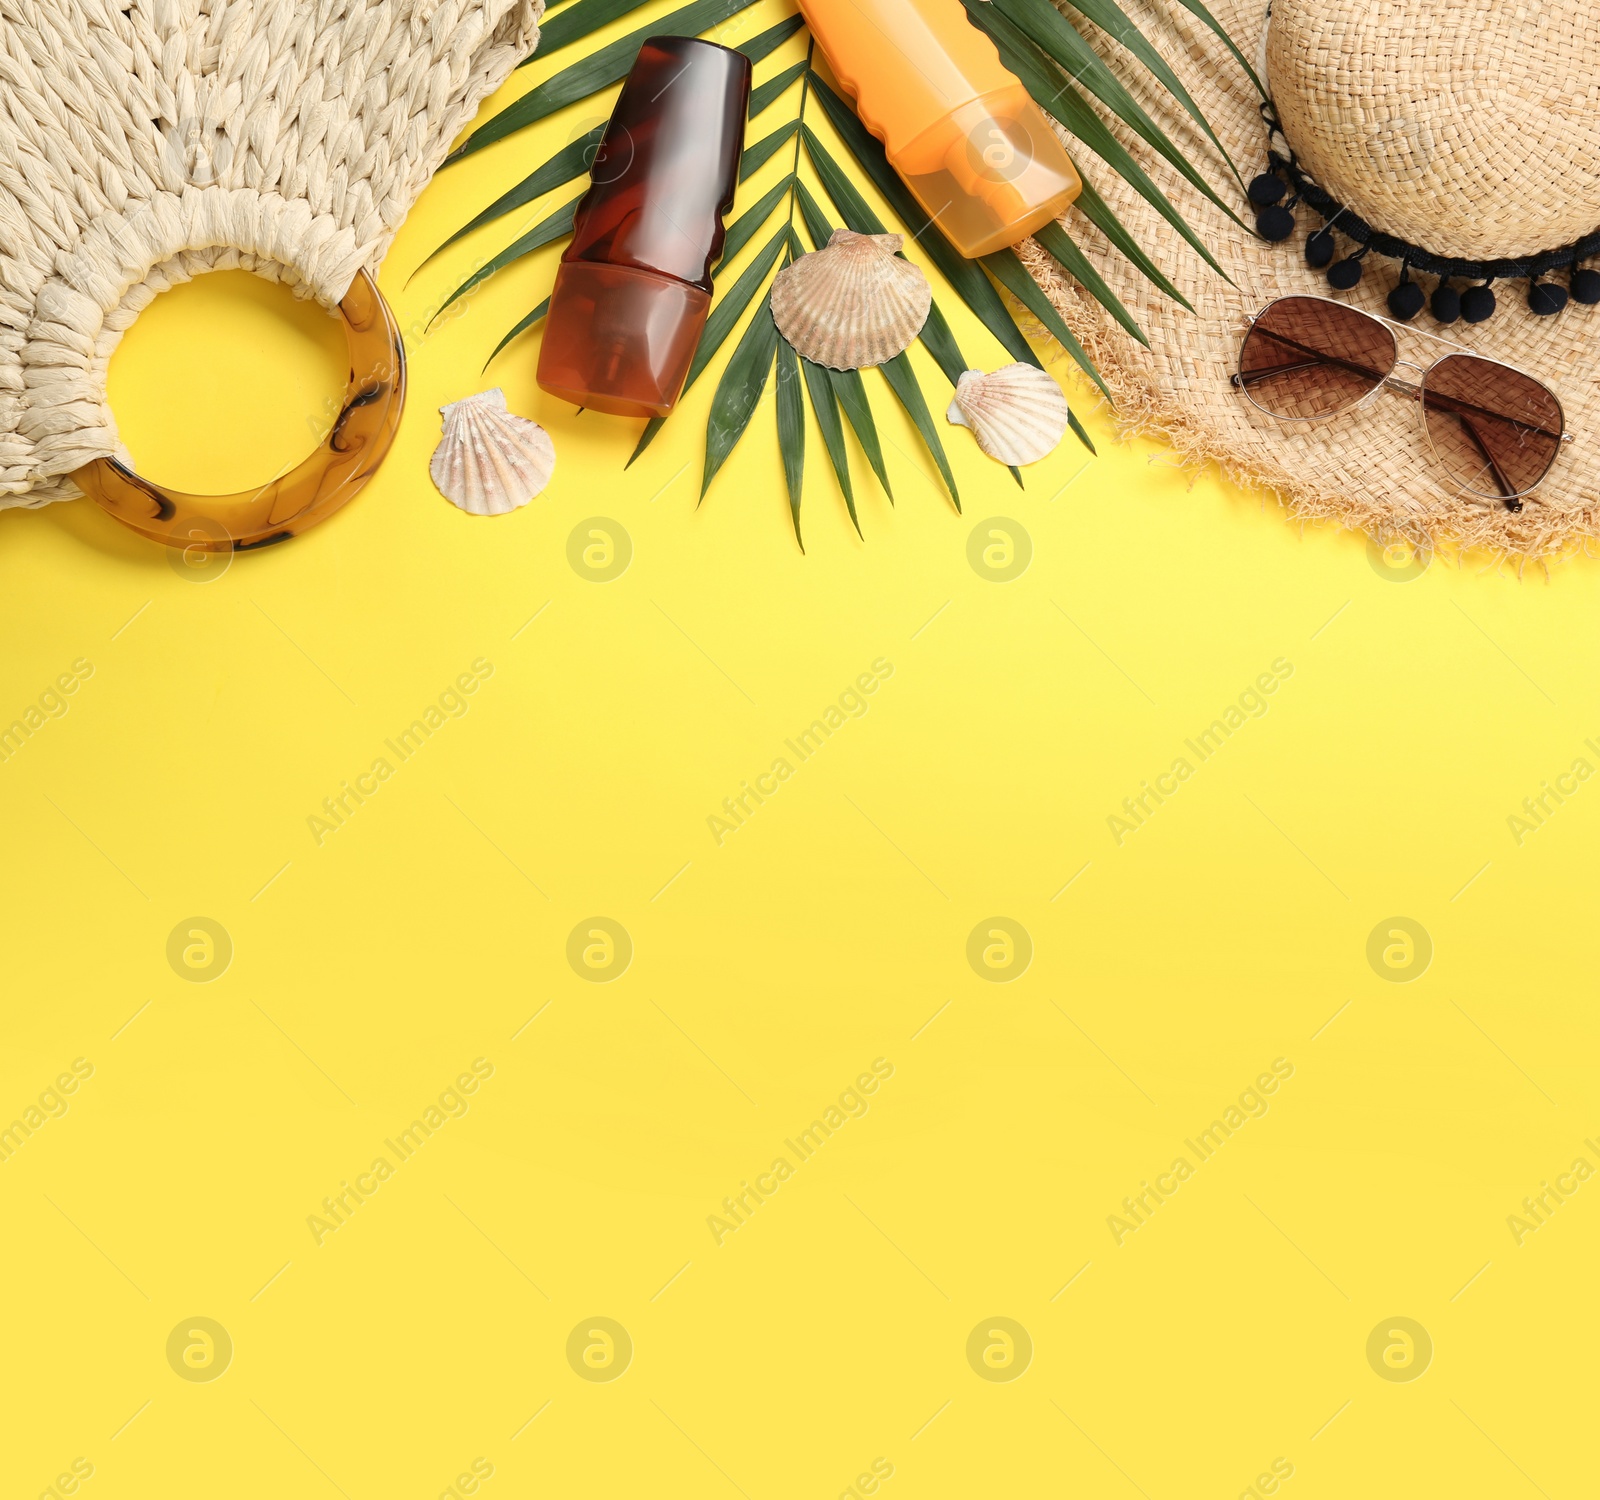 Photo of Sun protection products and beach accessories on yellow background, flat lay. Space for text